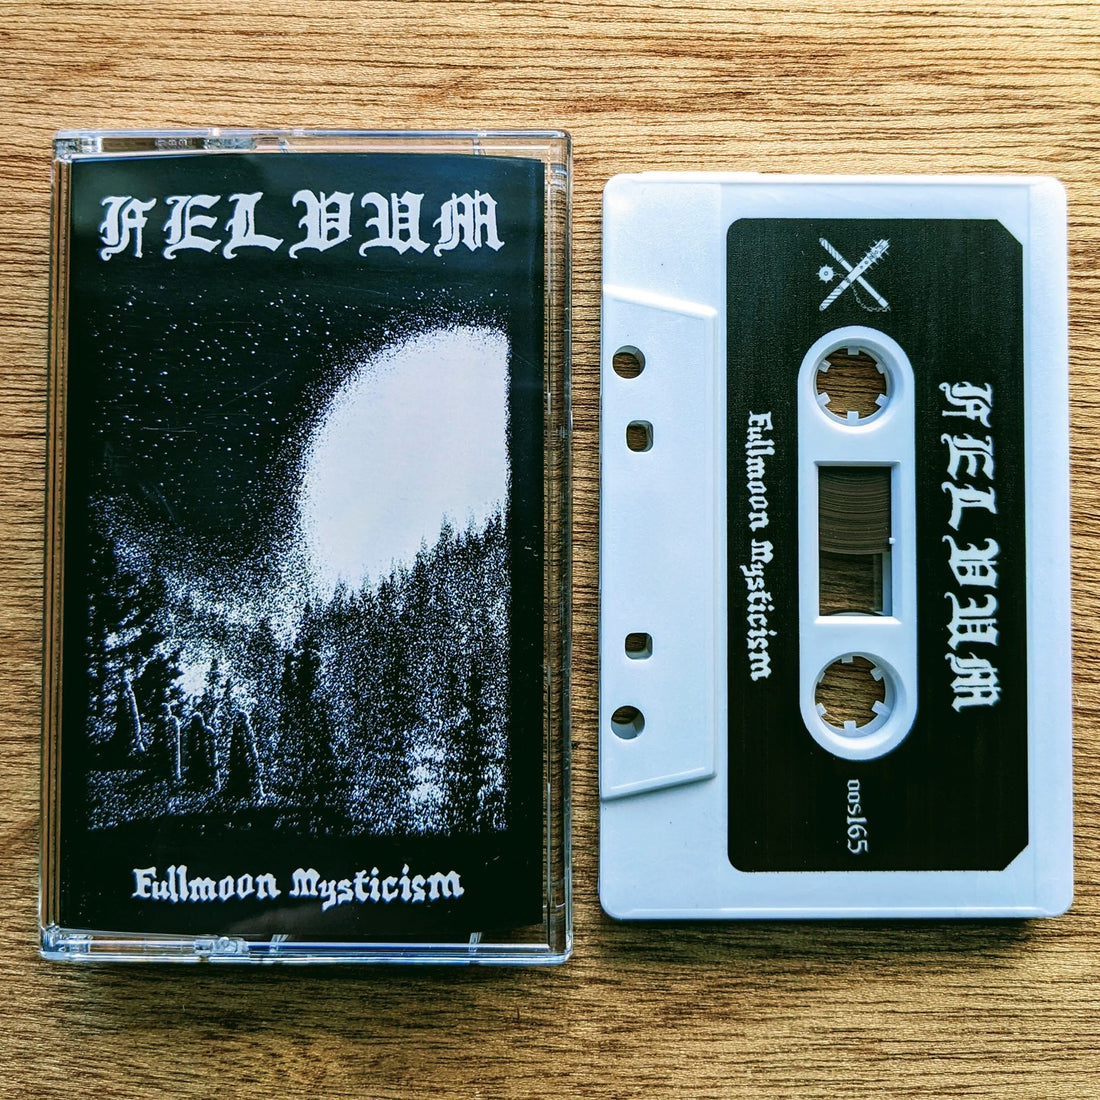 Two new releases and a bunch of distro tapes